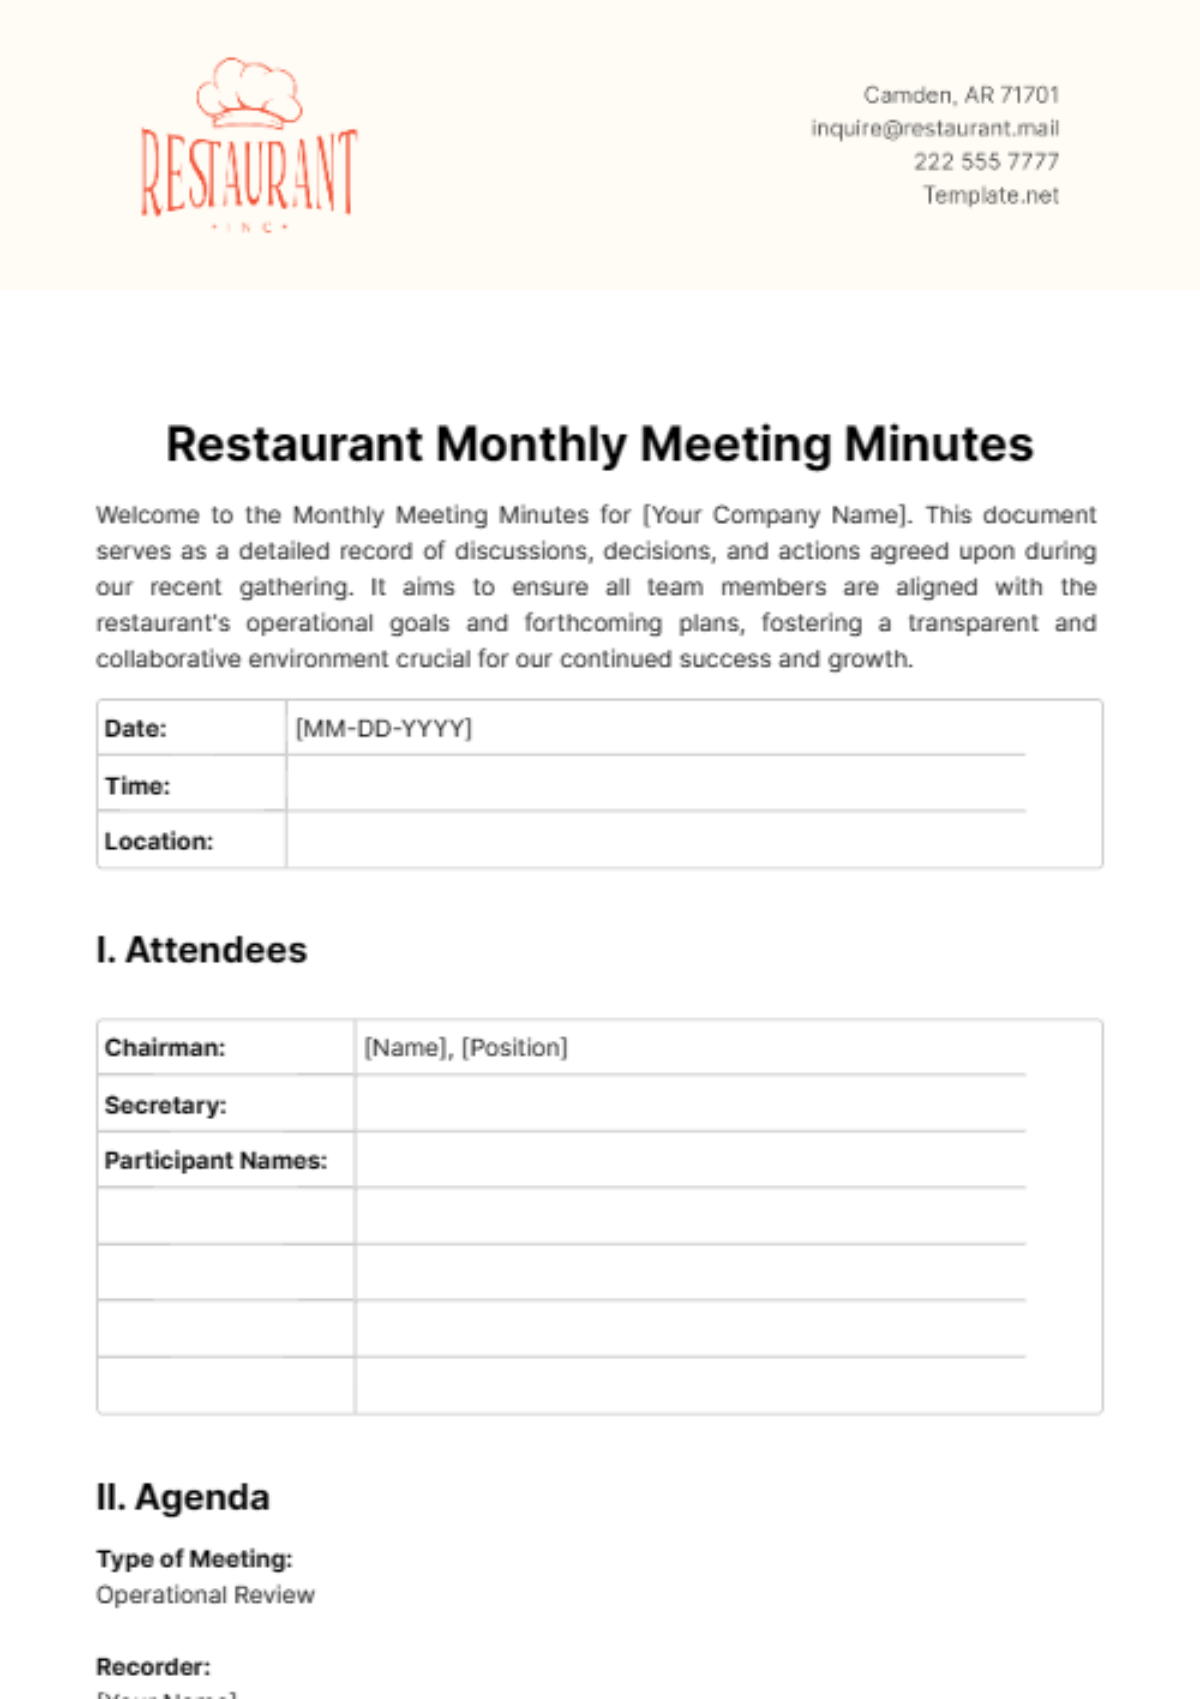 Restaurant Monthly Meeting Minutes Template